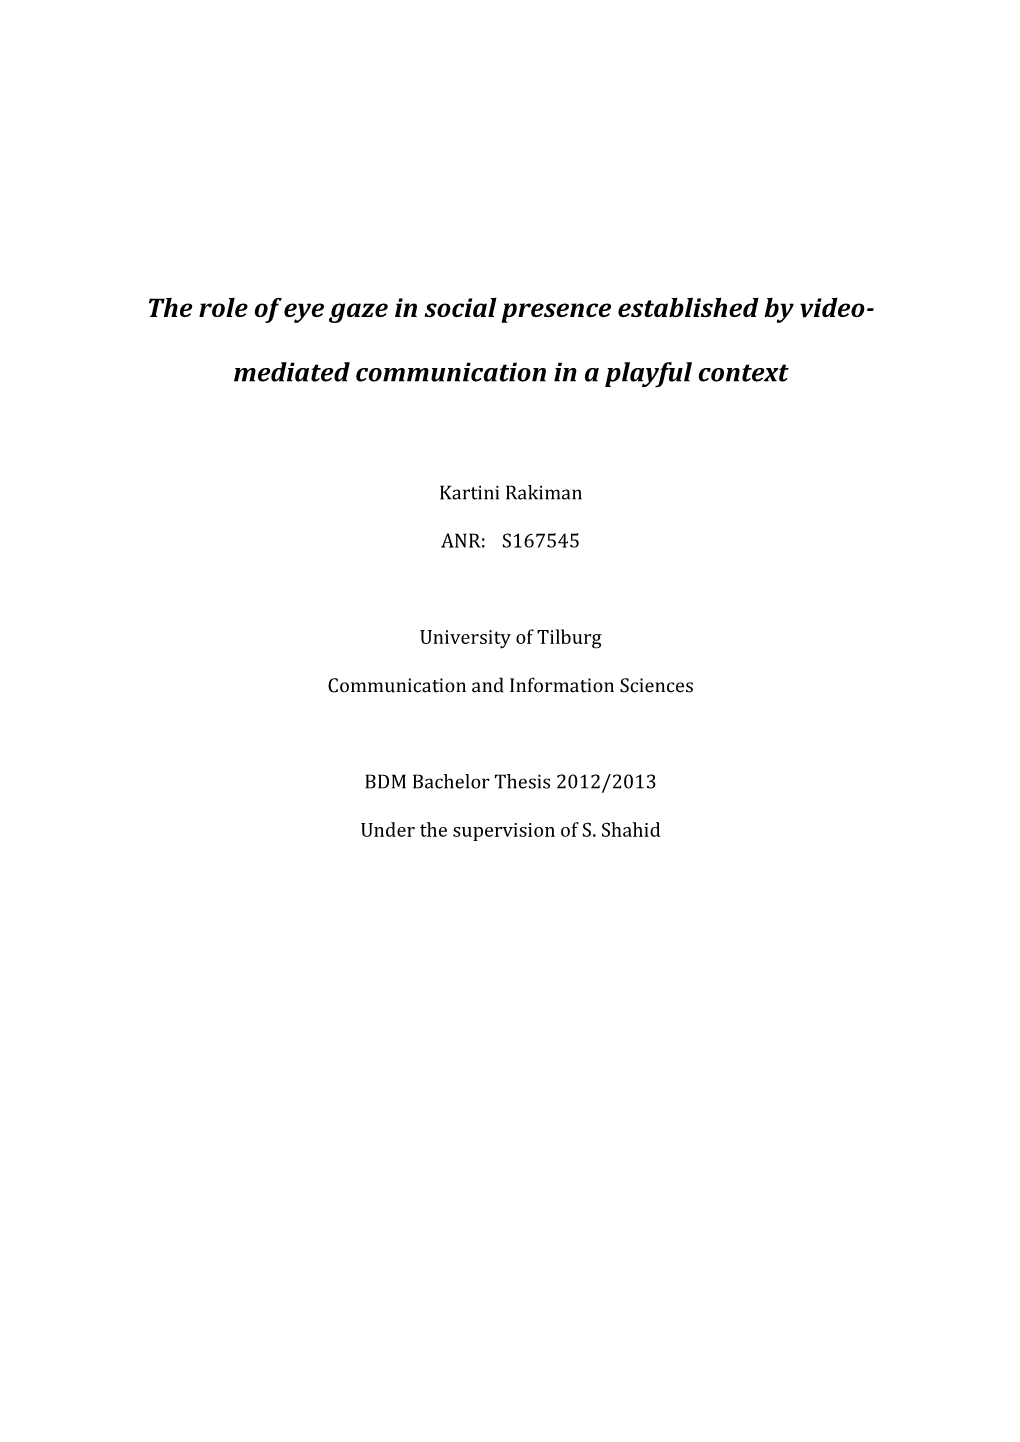 The Role of Eye Gaze in Social Presence Established by Video- Mediated Communication in a Playful Context